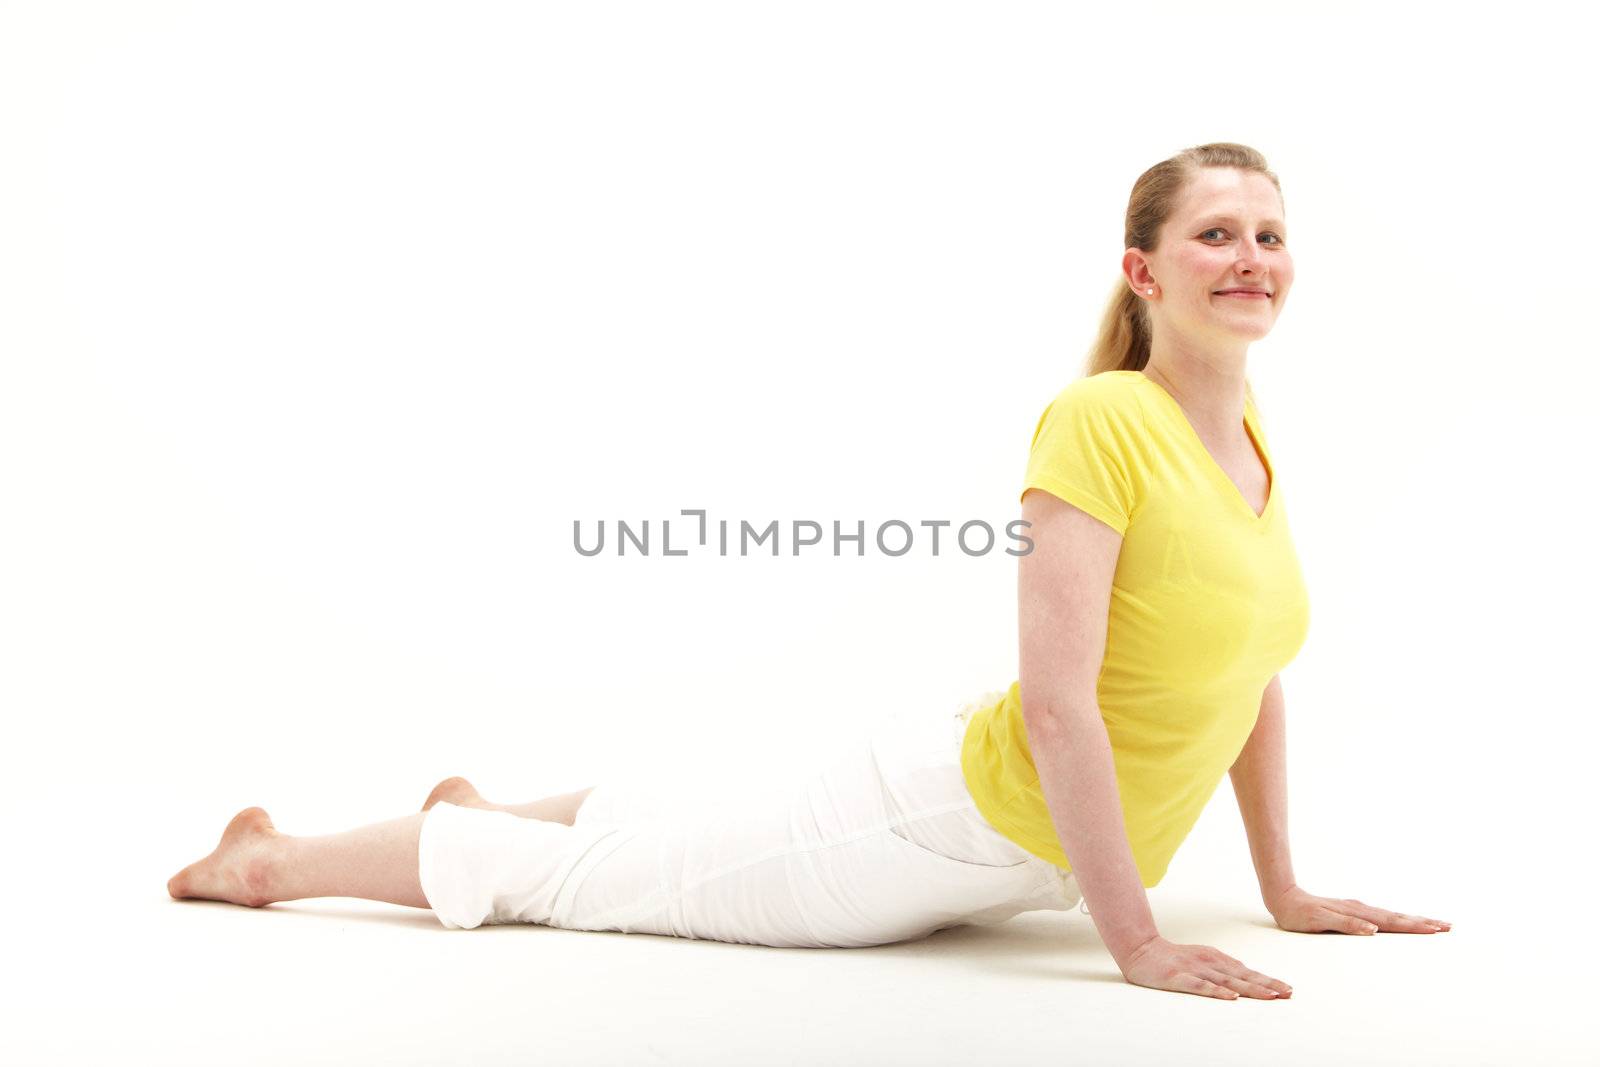 Fit healthy woman full of vitality smiling happily while doing pressups on the floor, studio portrait on white 